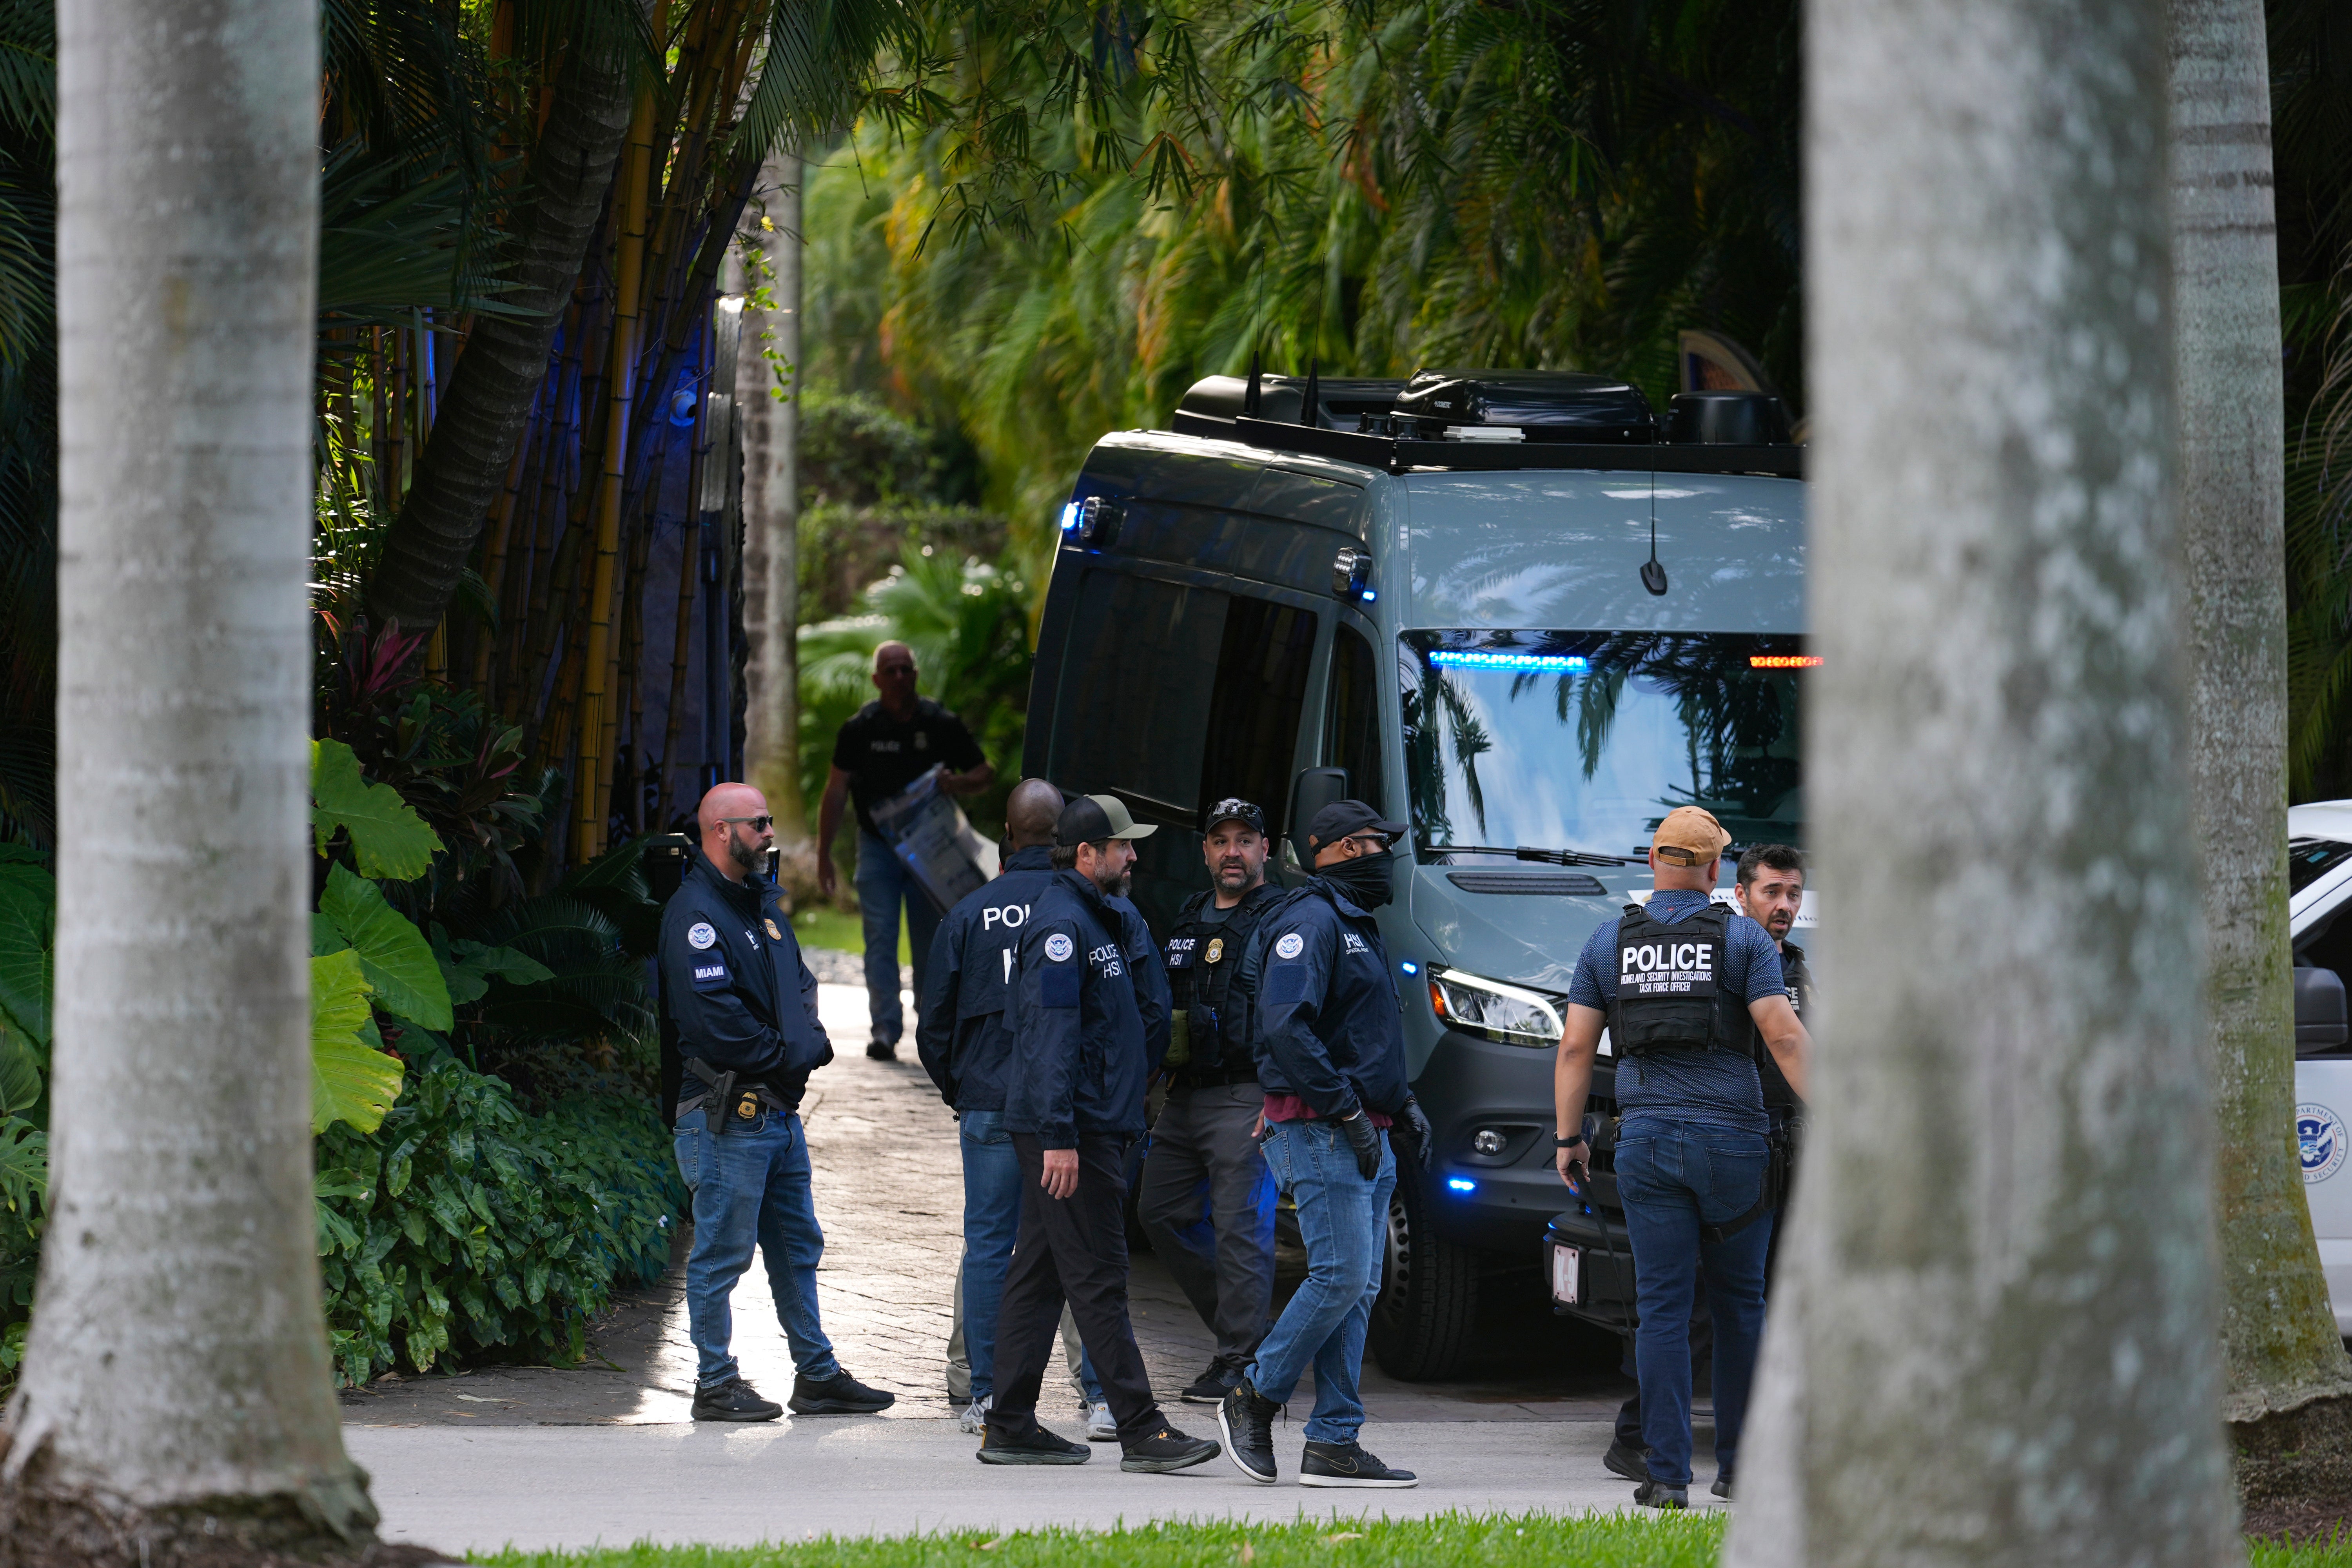 Federal agents at Diddy’s home in Star Island, Miami Beach, during the raid